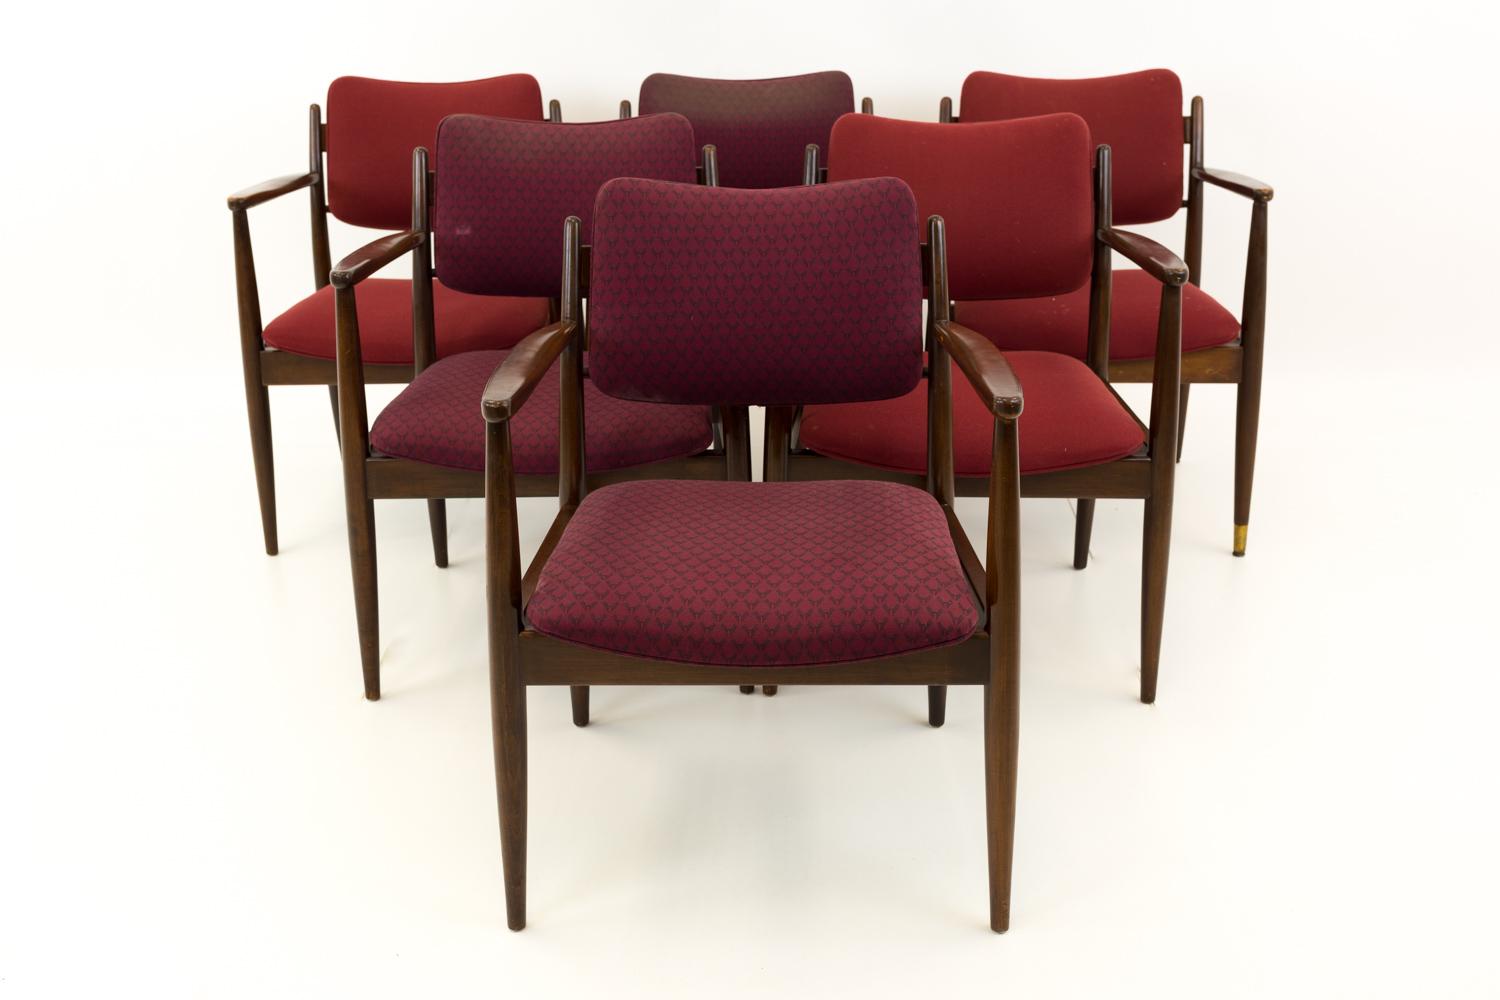 Lawrence Peabody for Nemschoff Mid Century captains dining occasional chairs
Each chair measures 23.75 wide x 23 deep x 32.5 high with a seat height of 17.5

This price includes getting this piece in what we call restored vintage condition. That